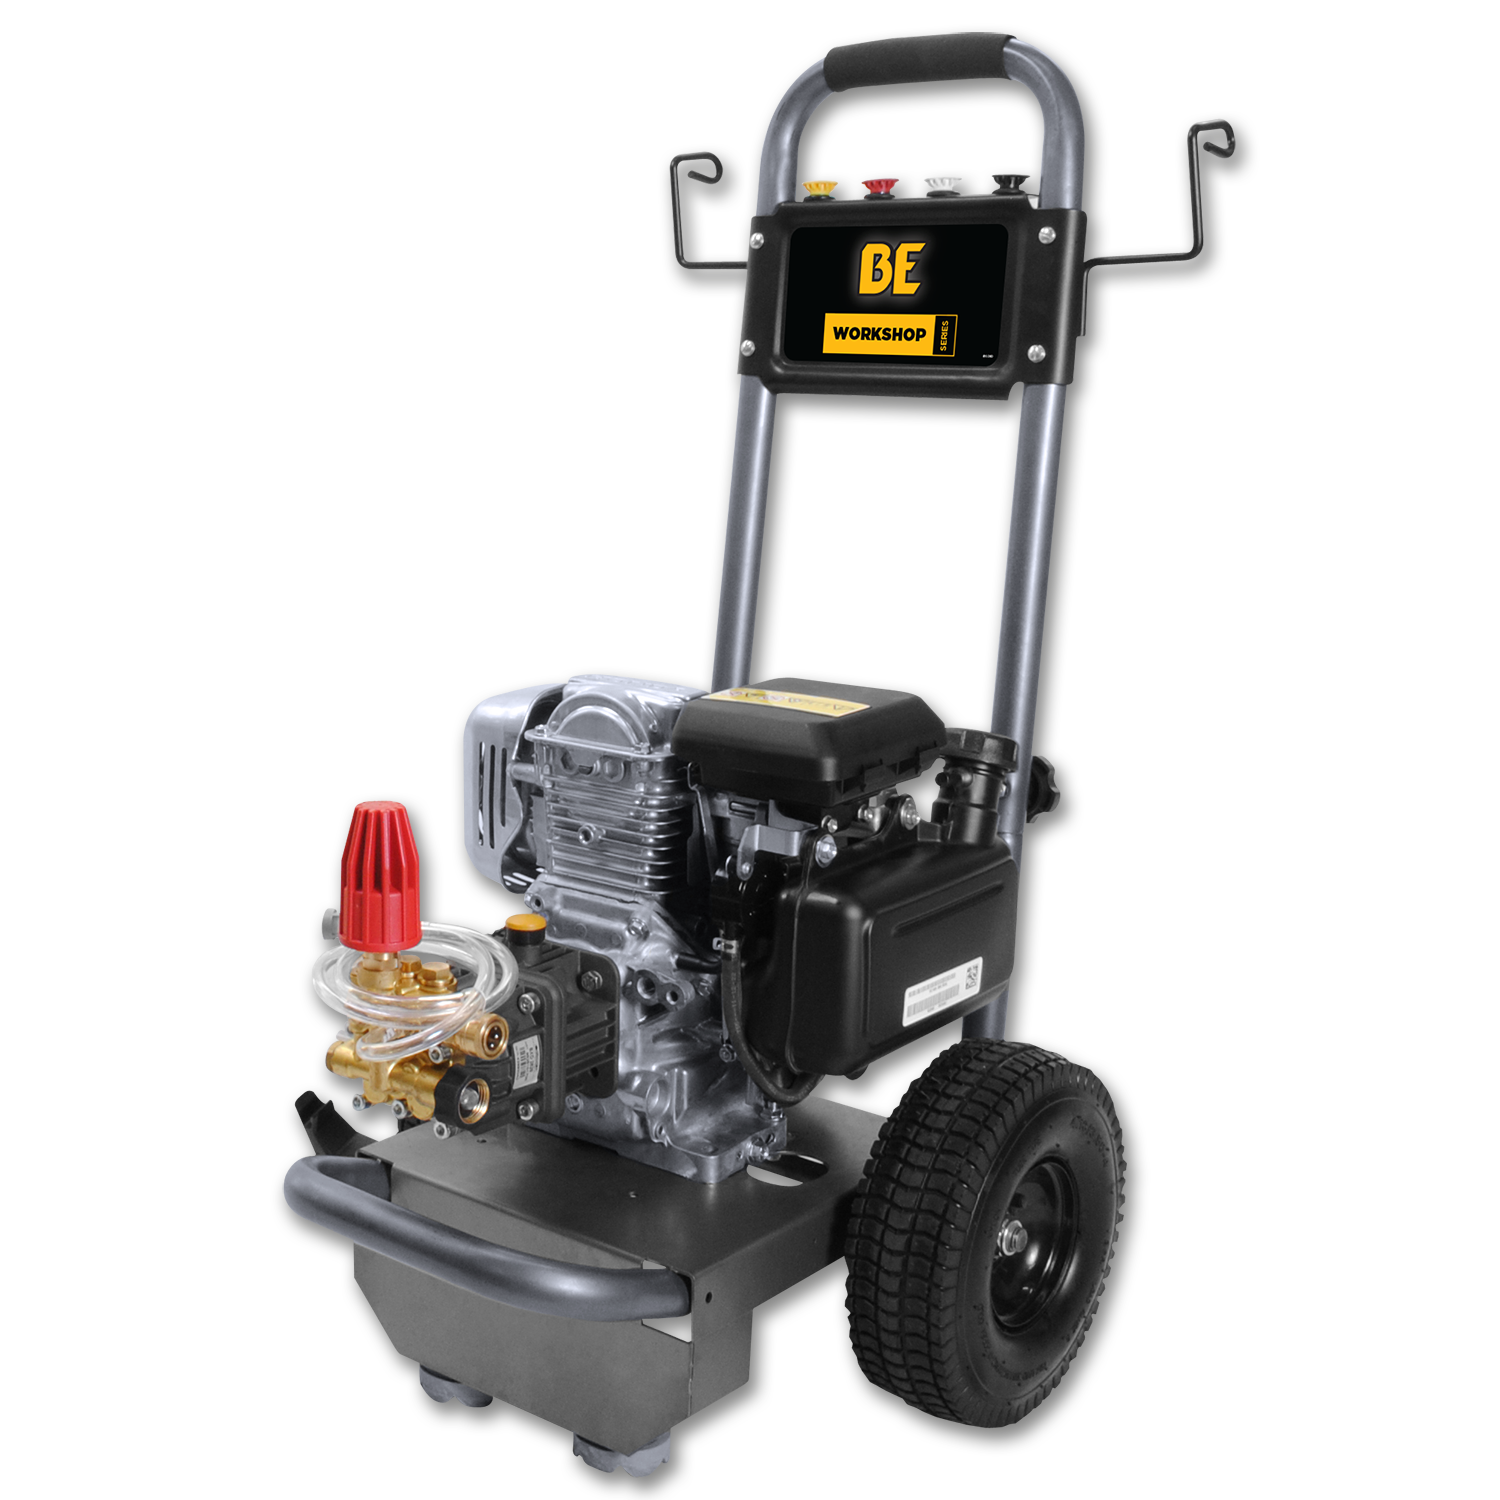 Chadwell Supply. PRESSURE WASHER 5HP 2700 PSI